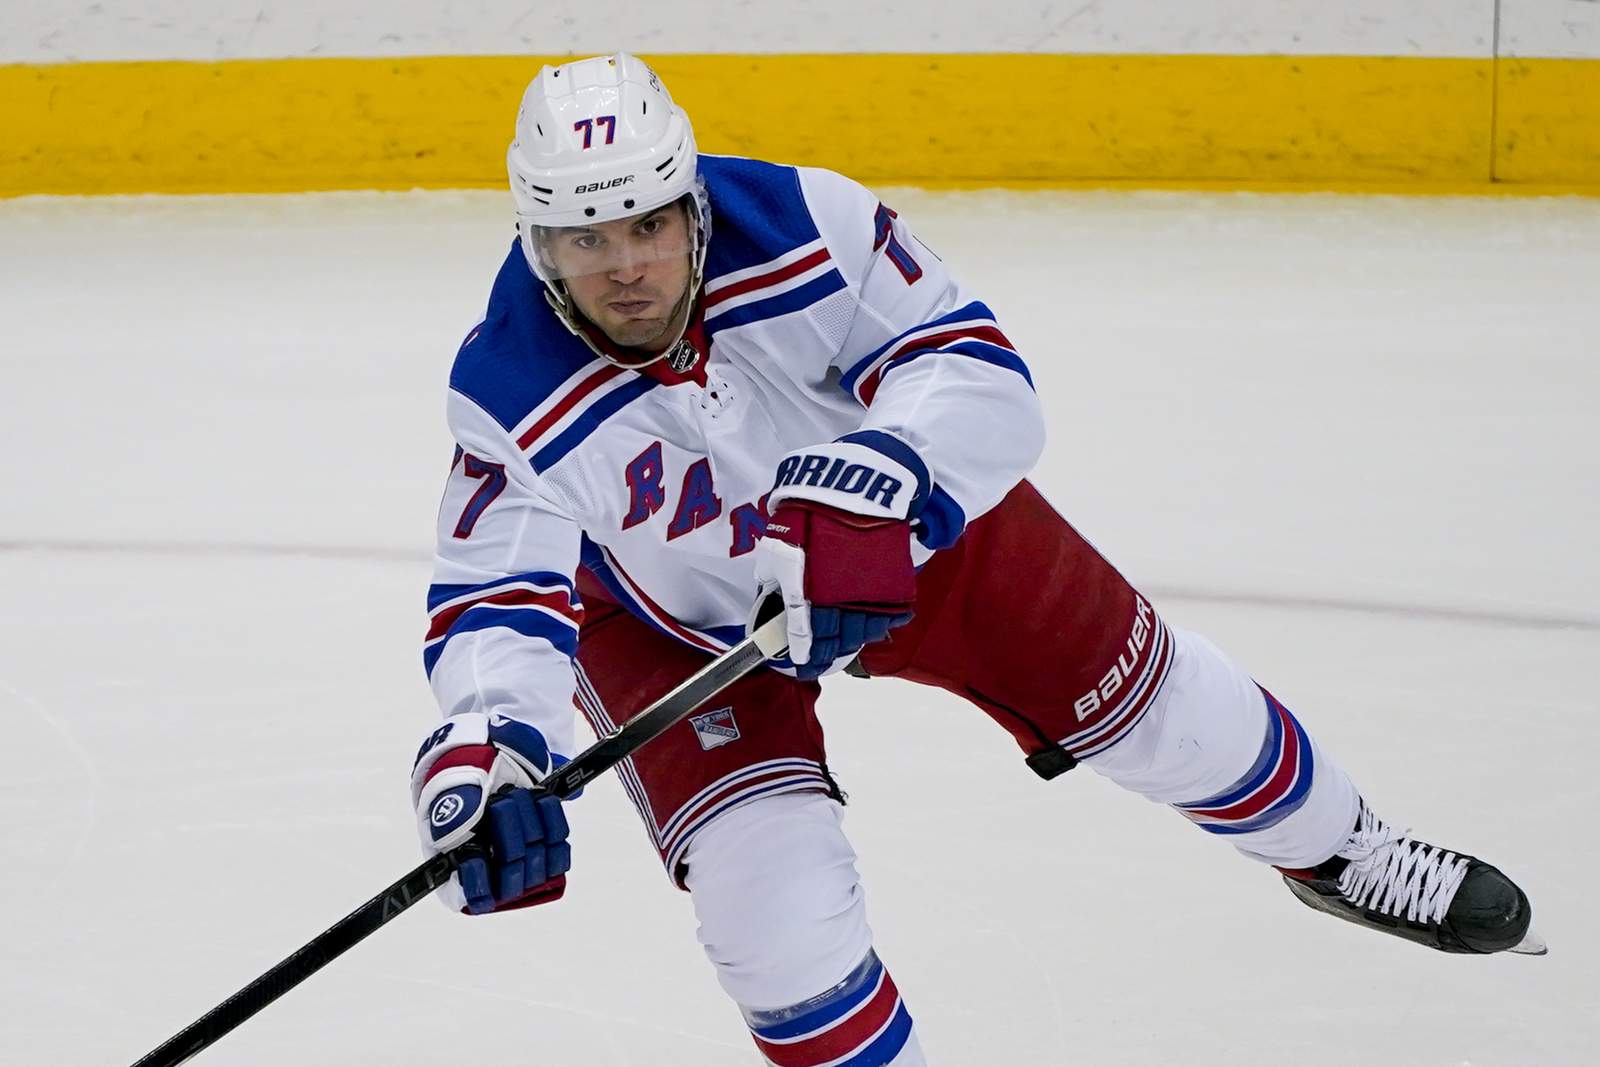 DeAngelo 'has played his last game' for NY Rangers, GM says